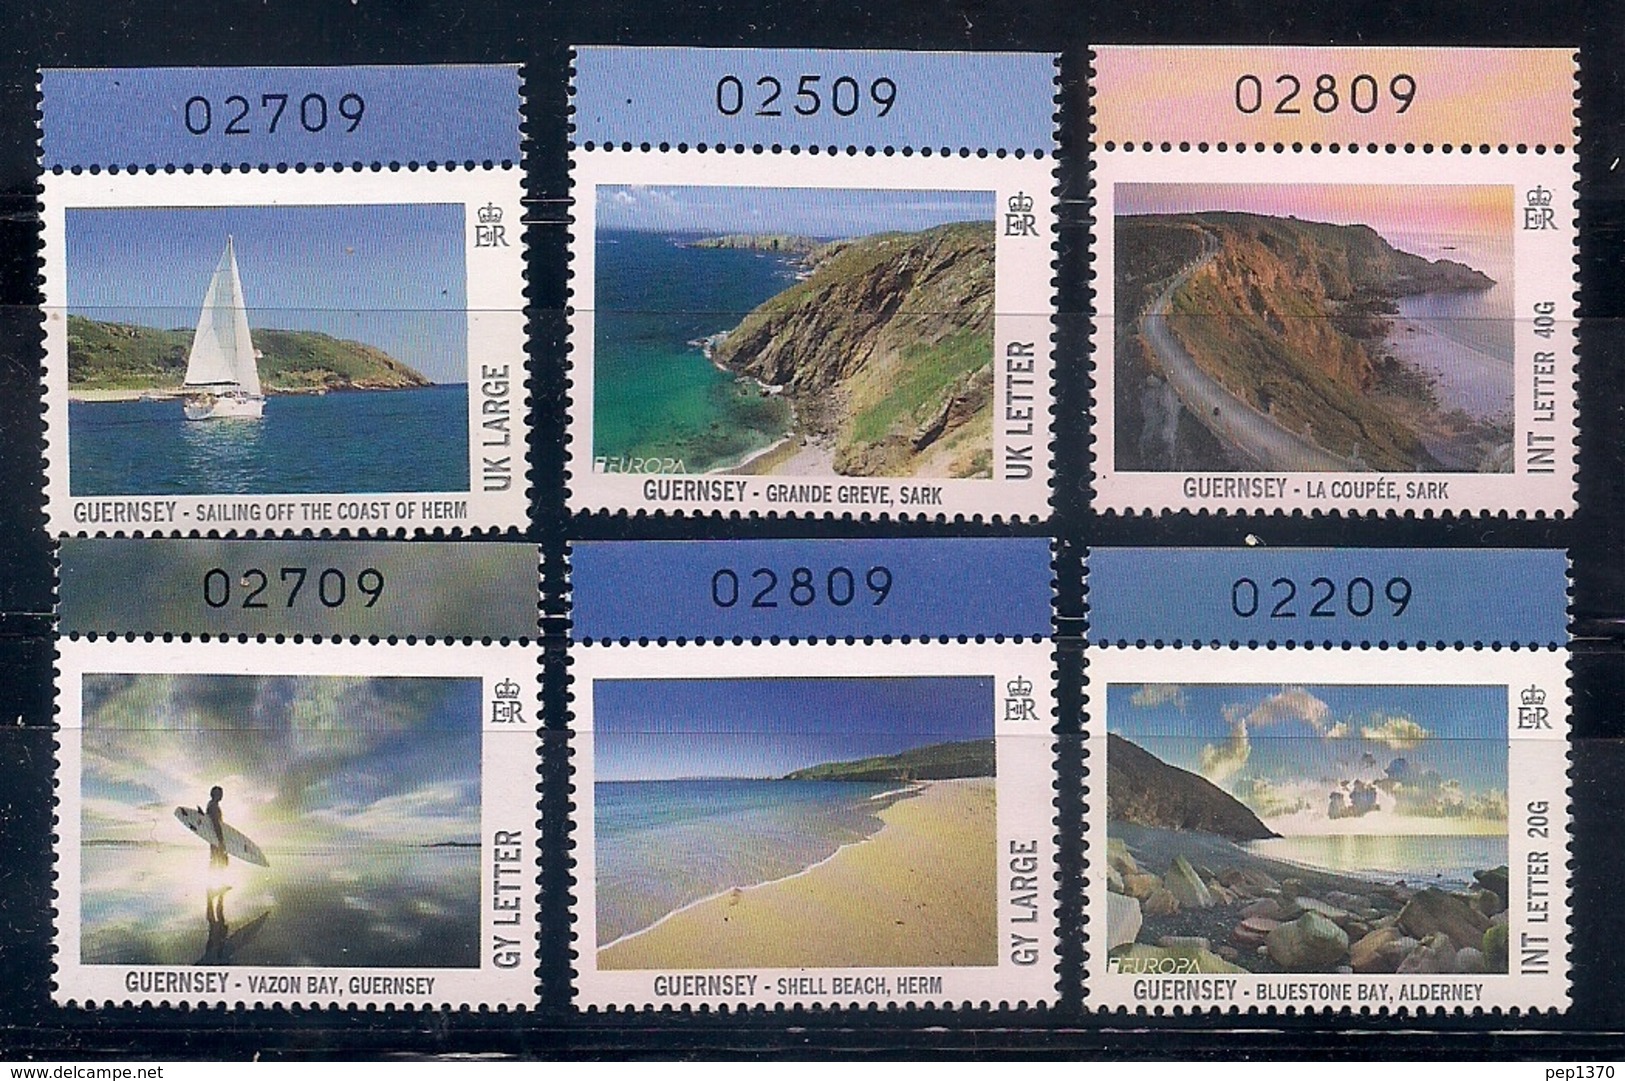 GUERNSEY 2012 - EUROPA - VISITE GUERNSEY - SET OF 6 STAMPS - 2012